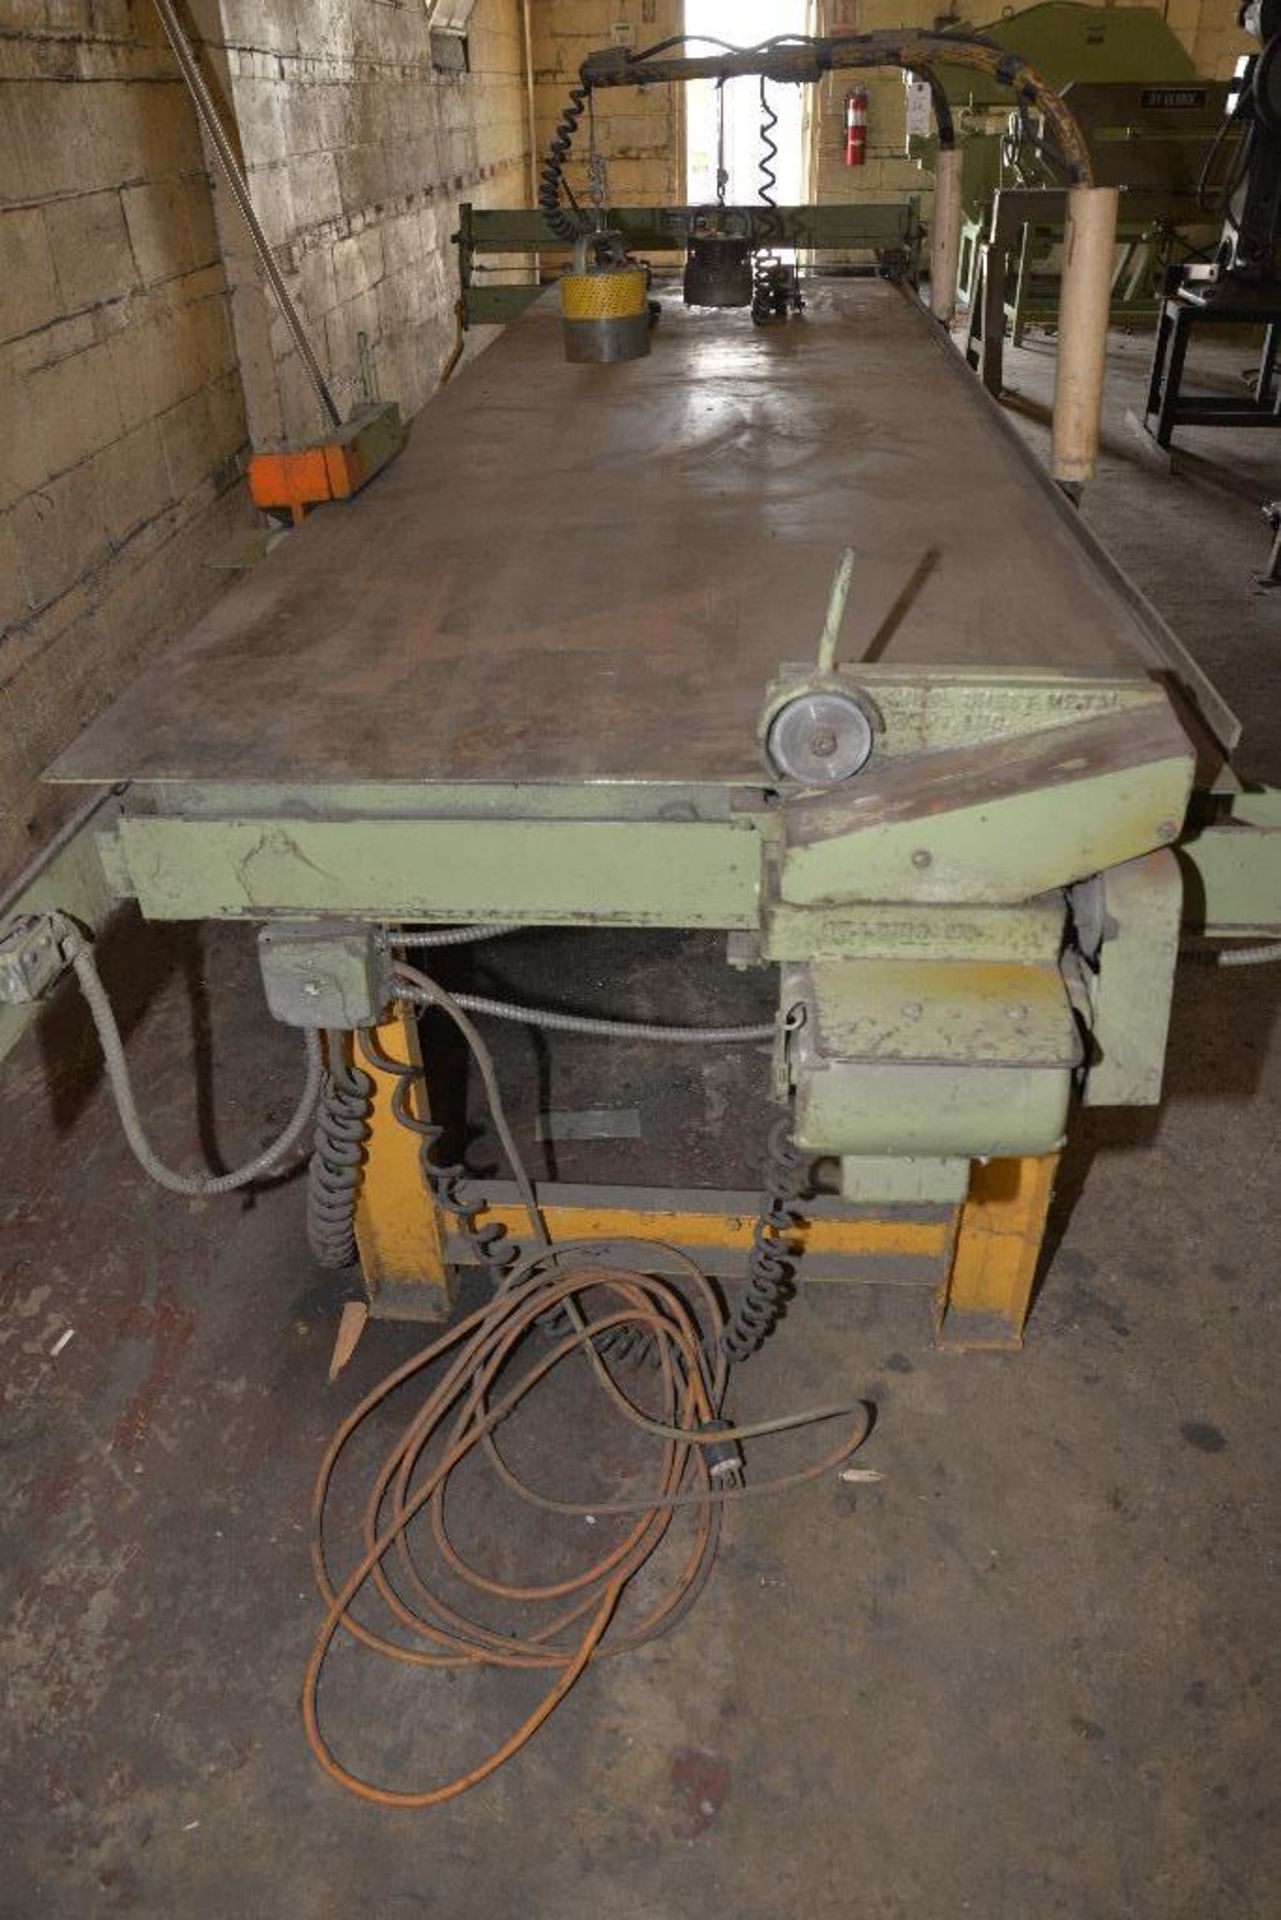 ENGEL SHOP MASTER MD. 101A-3-DM DUCT MACHINE S/N 22788-1 - STEEL TABLE - 2 ELECTRONIC MAGNETS - - Image 7 of 13